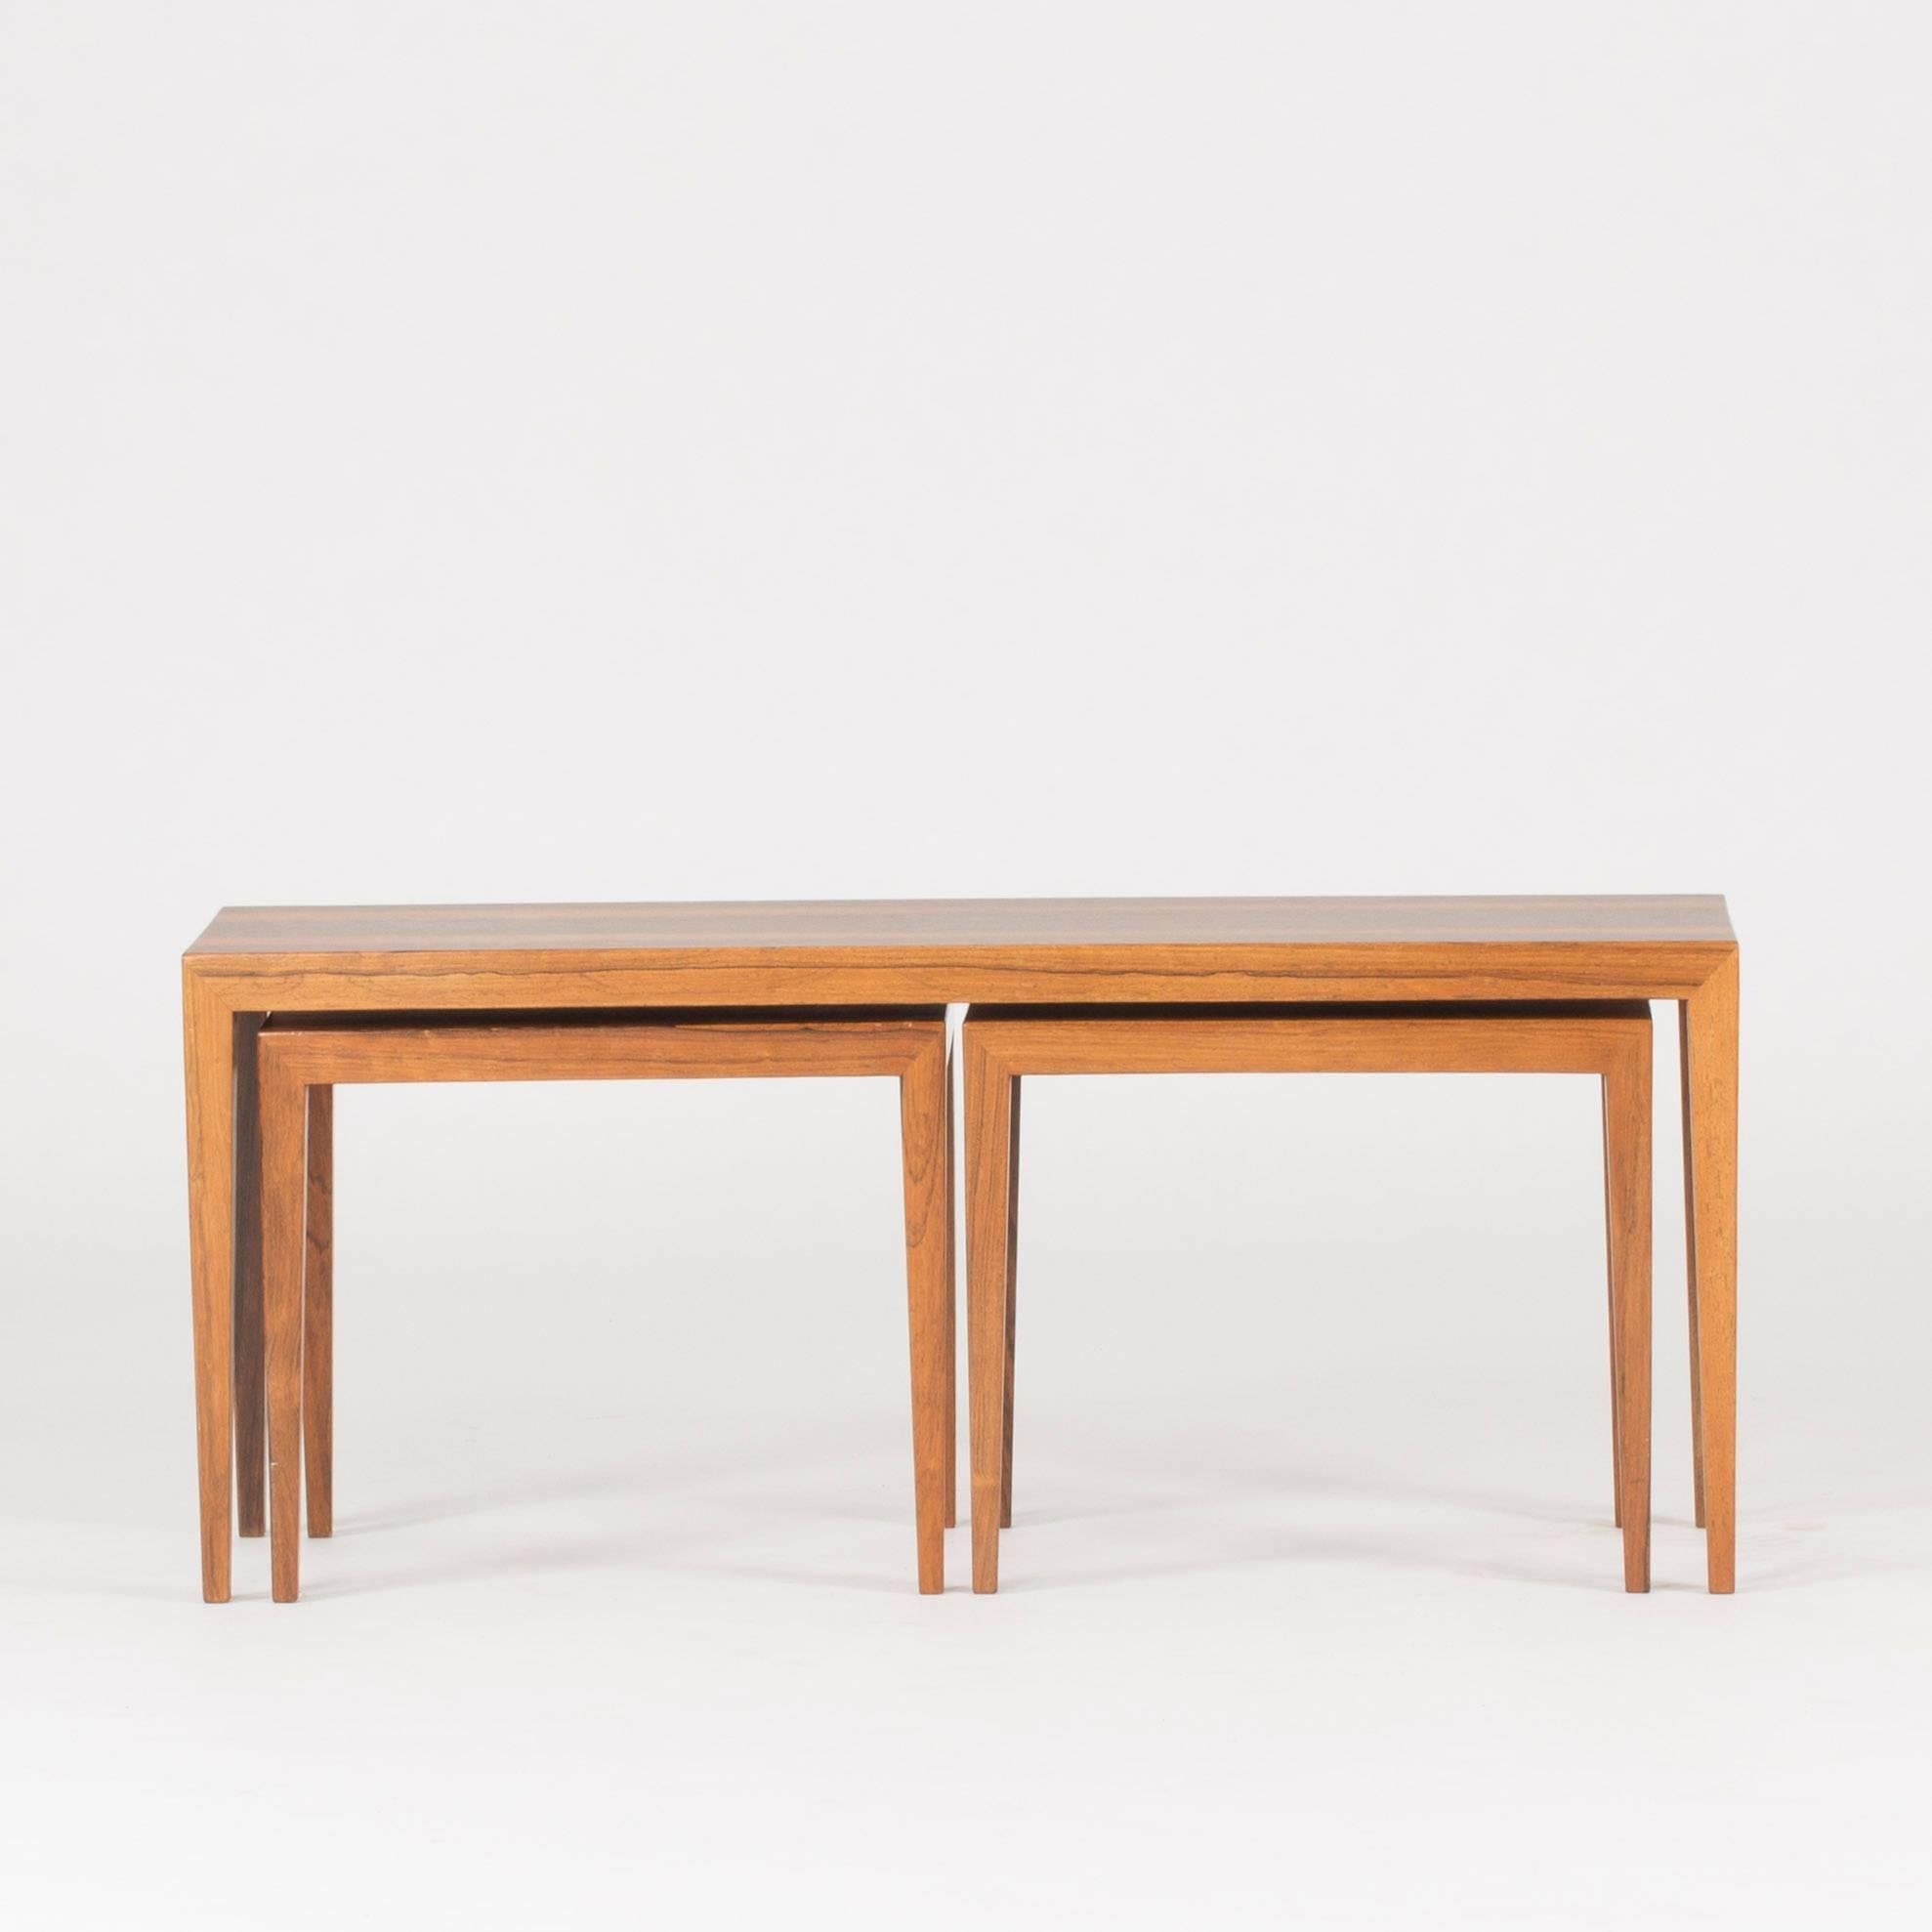 Long, elegant rosewood nesting table by Severin Hansen. Two smaller tables are set next to each other under the long upper table. Beautiful veneer.

The sizes of the small tables are as follows:

Height 41.5 cm
Width 49 cm
Depth 31.5 cm.